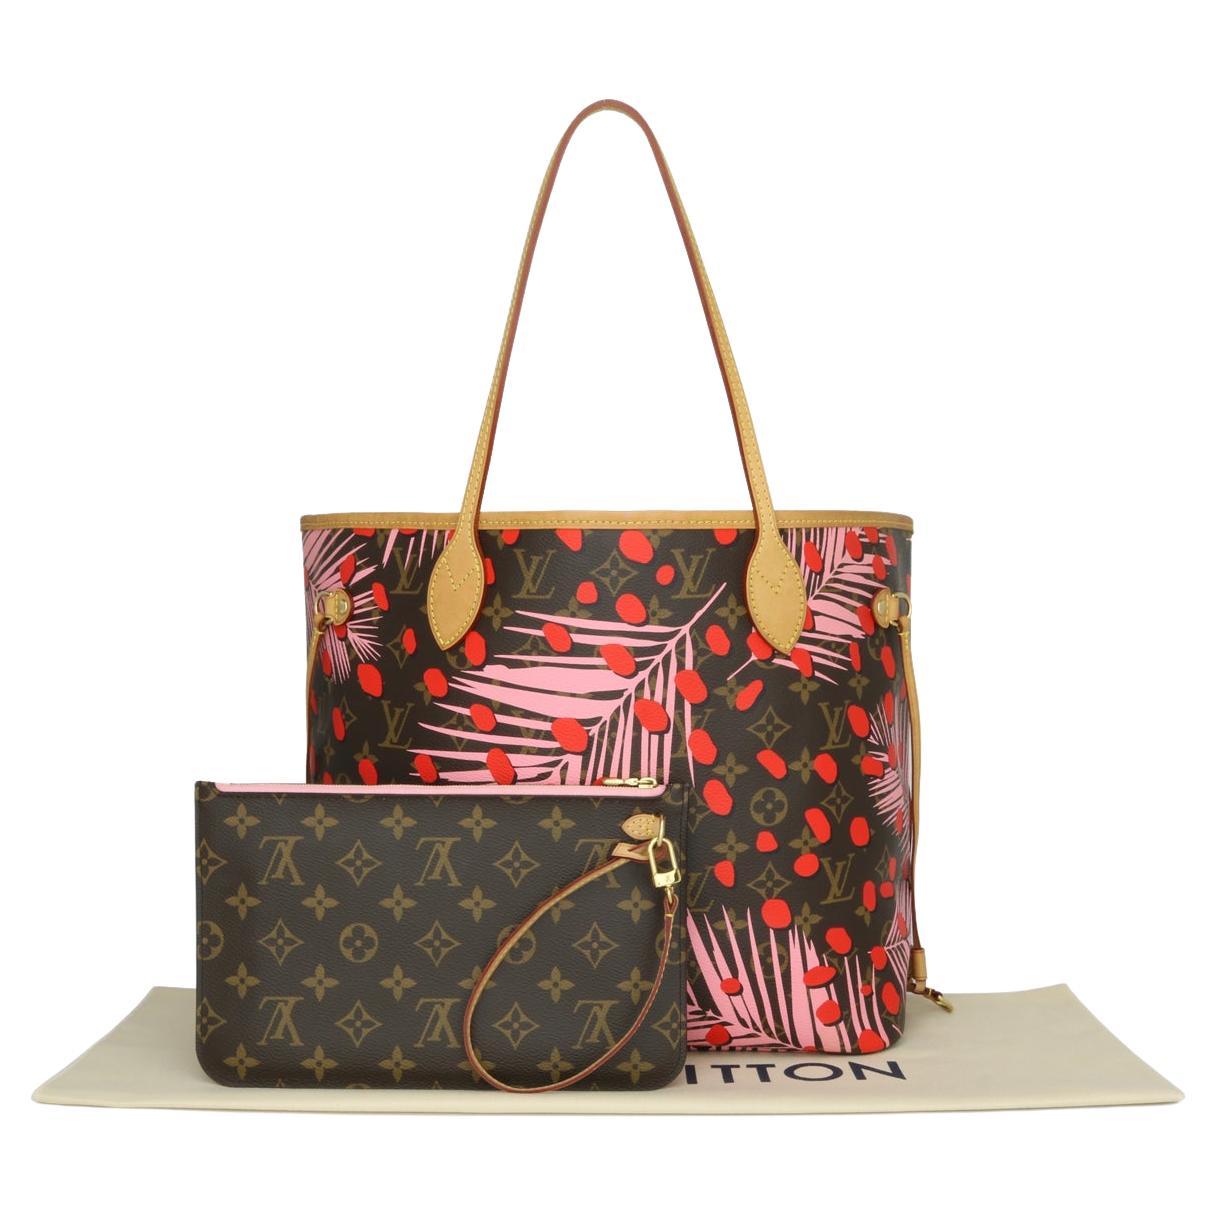 Louis Vuitton Neverfull MM Bag in Monogram Jungle Dots 2016 Limited Edition For Sale